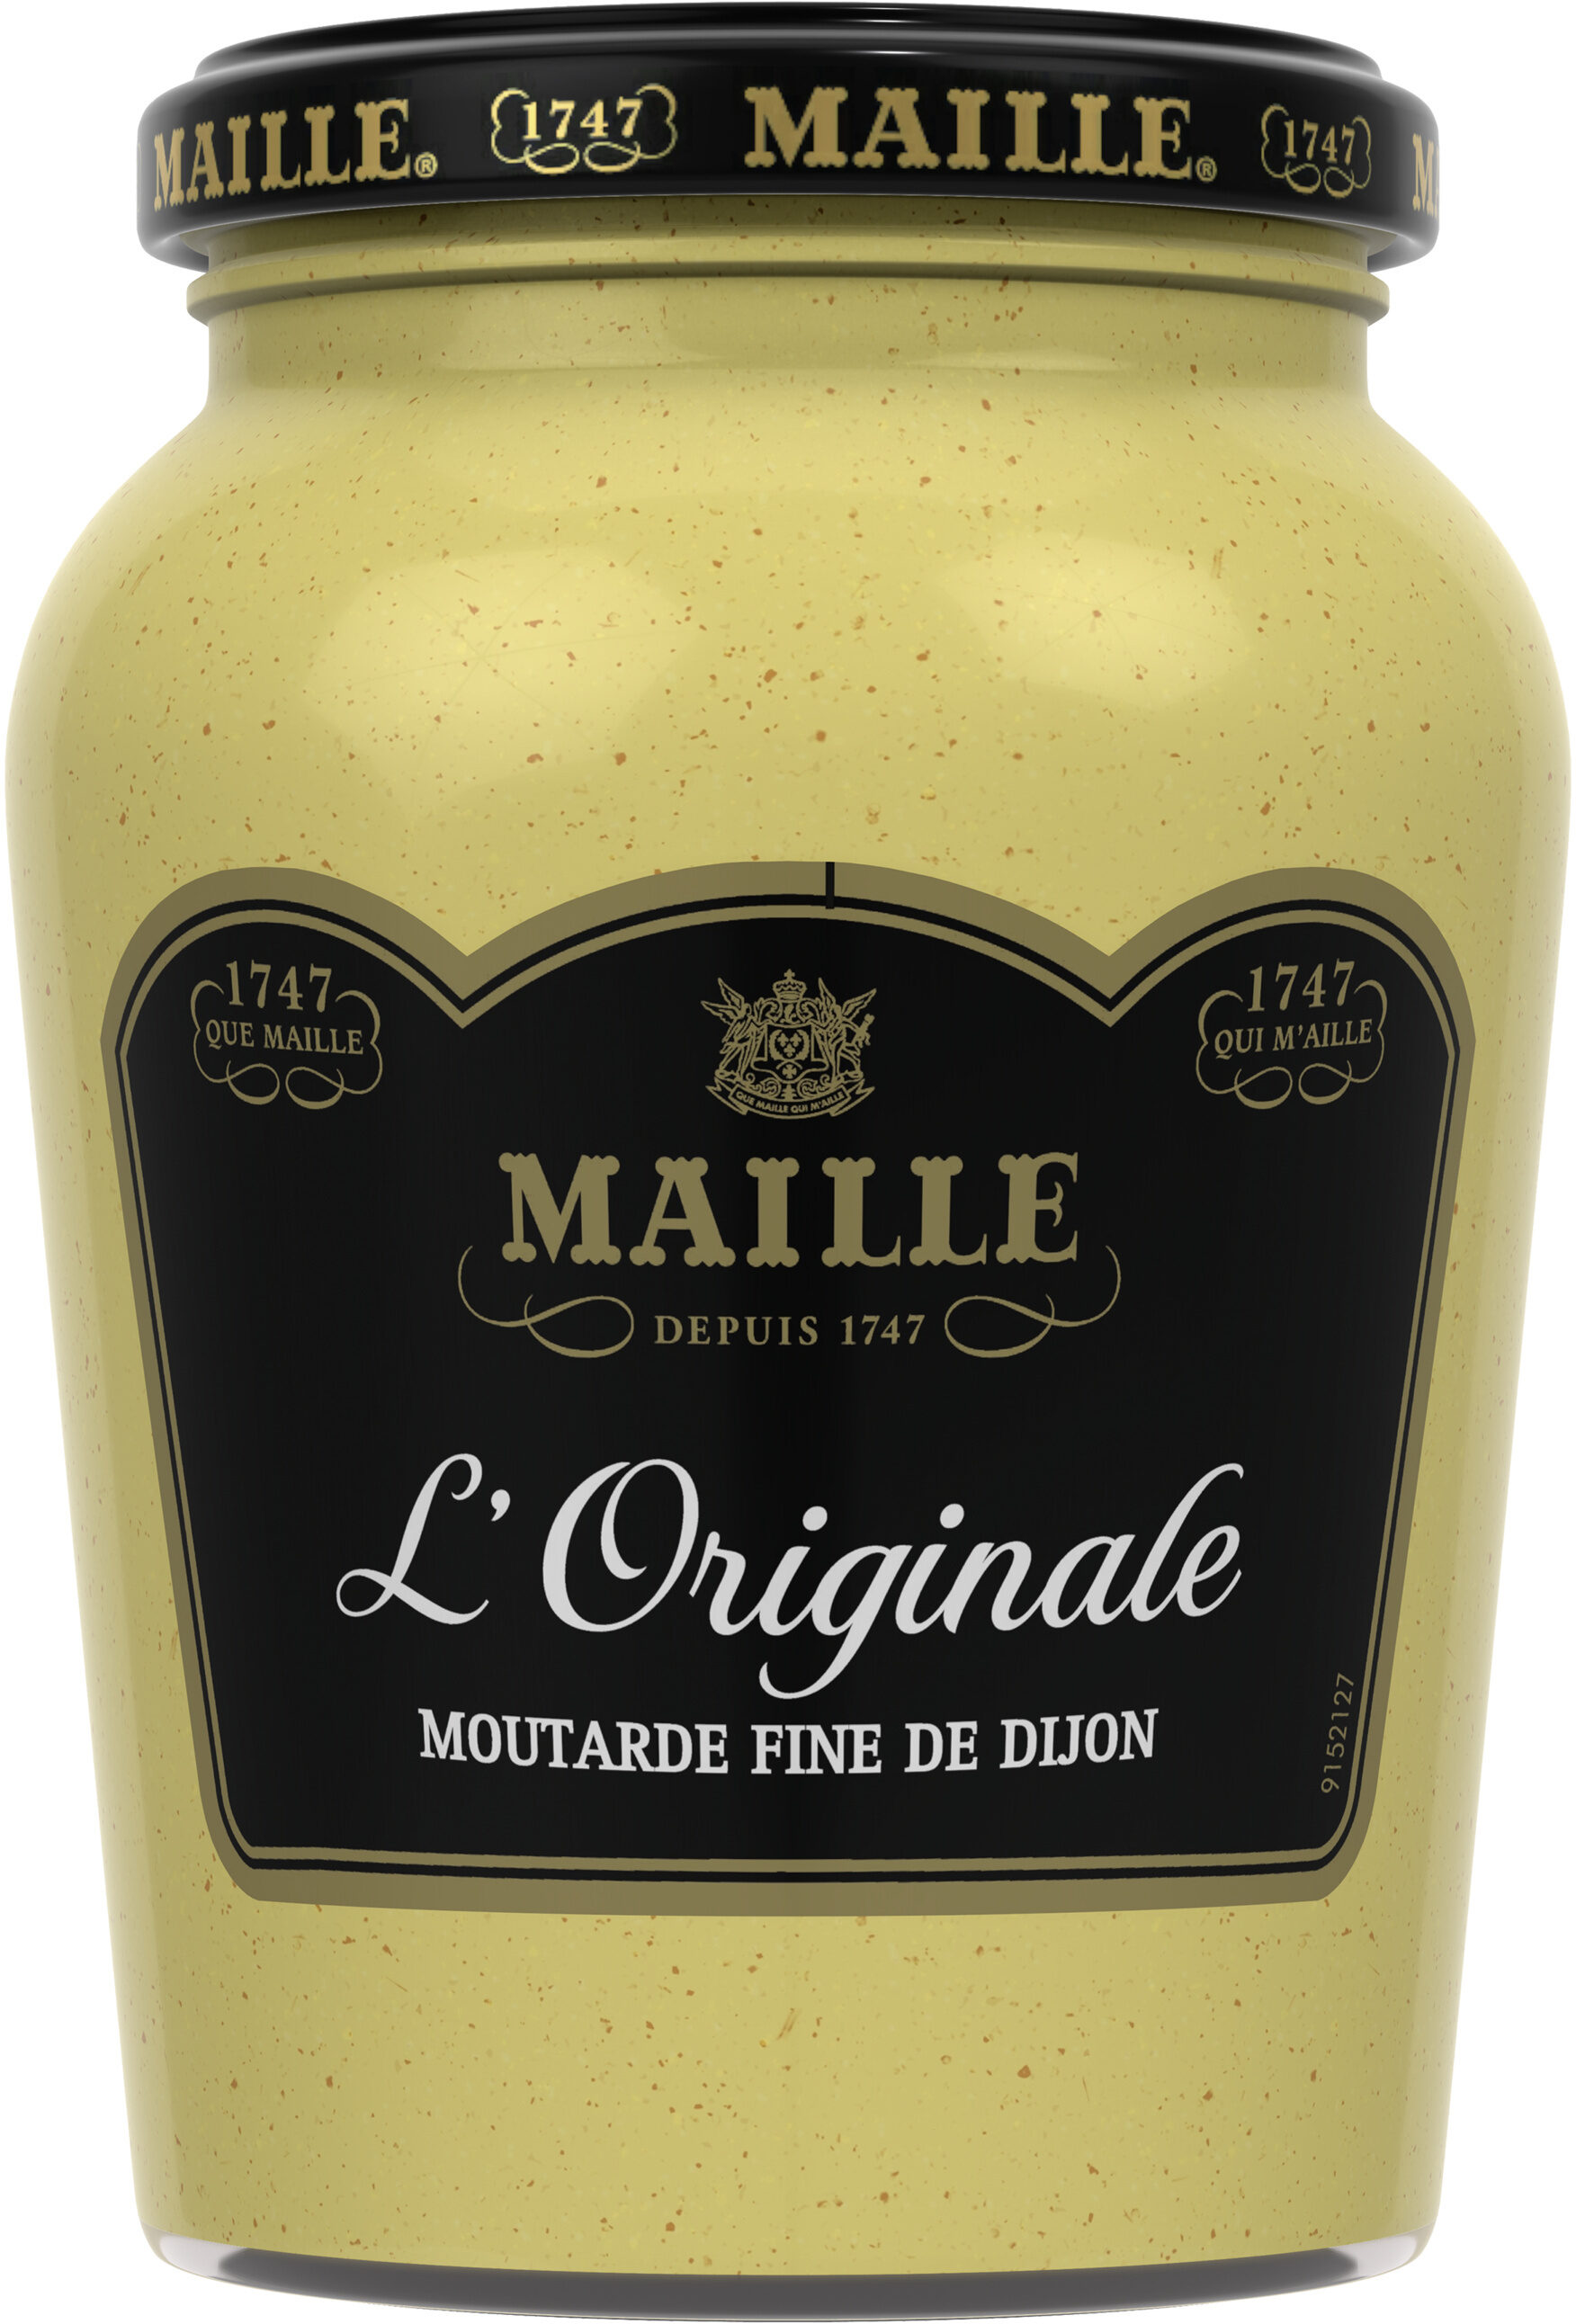 Maille mout orig fdl 360g - Recycling instructions and/or packaging information - fr